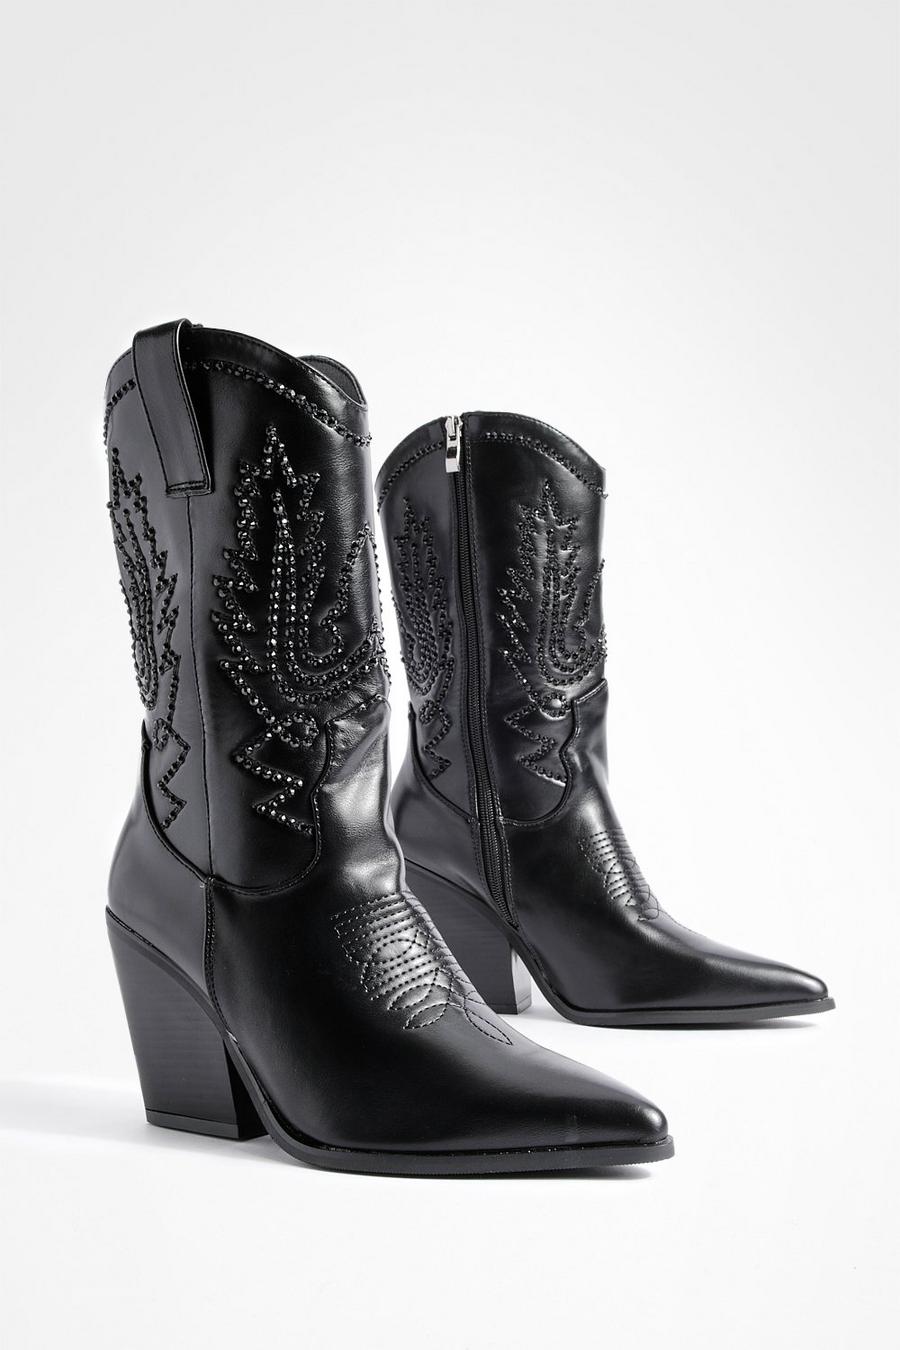 Black Studded Detail Western Cowboy Boots 